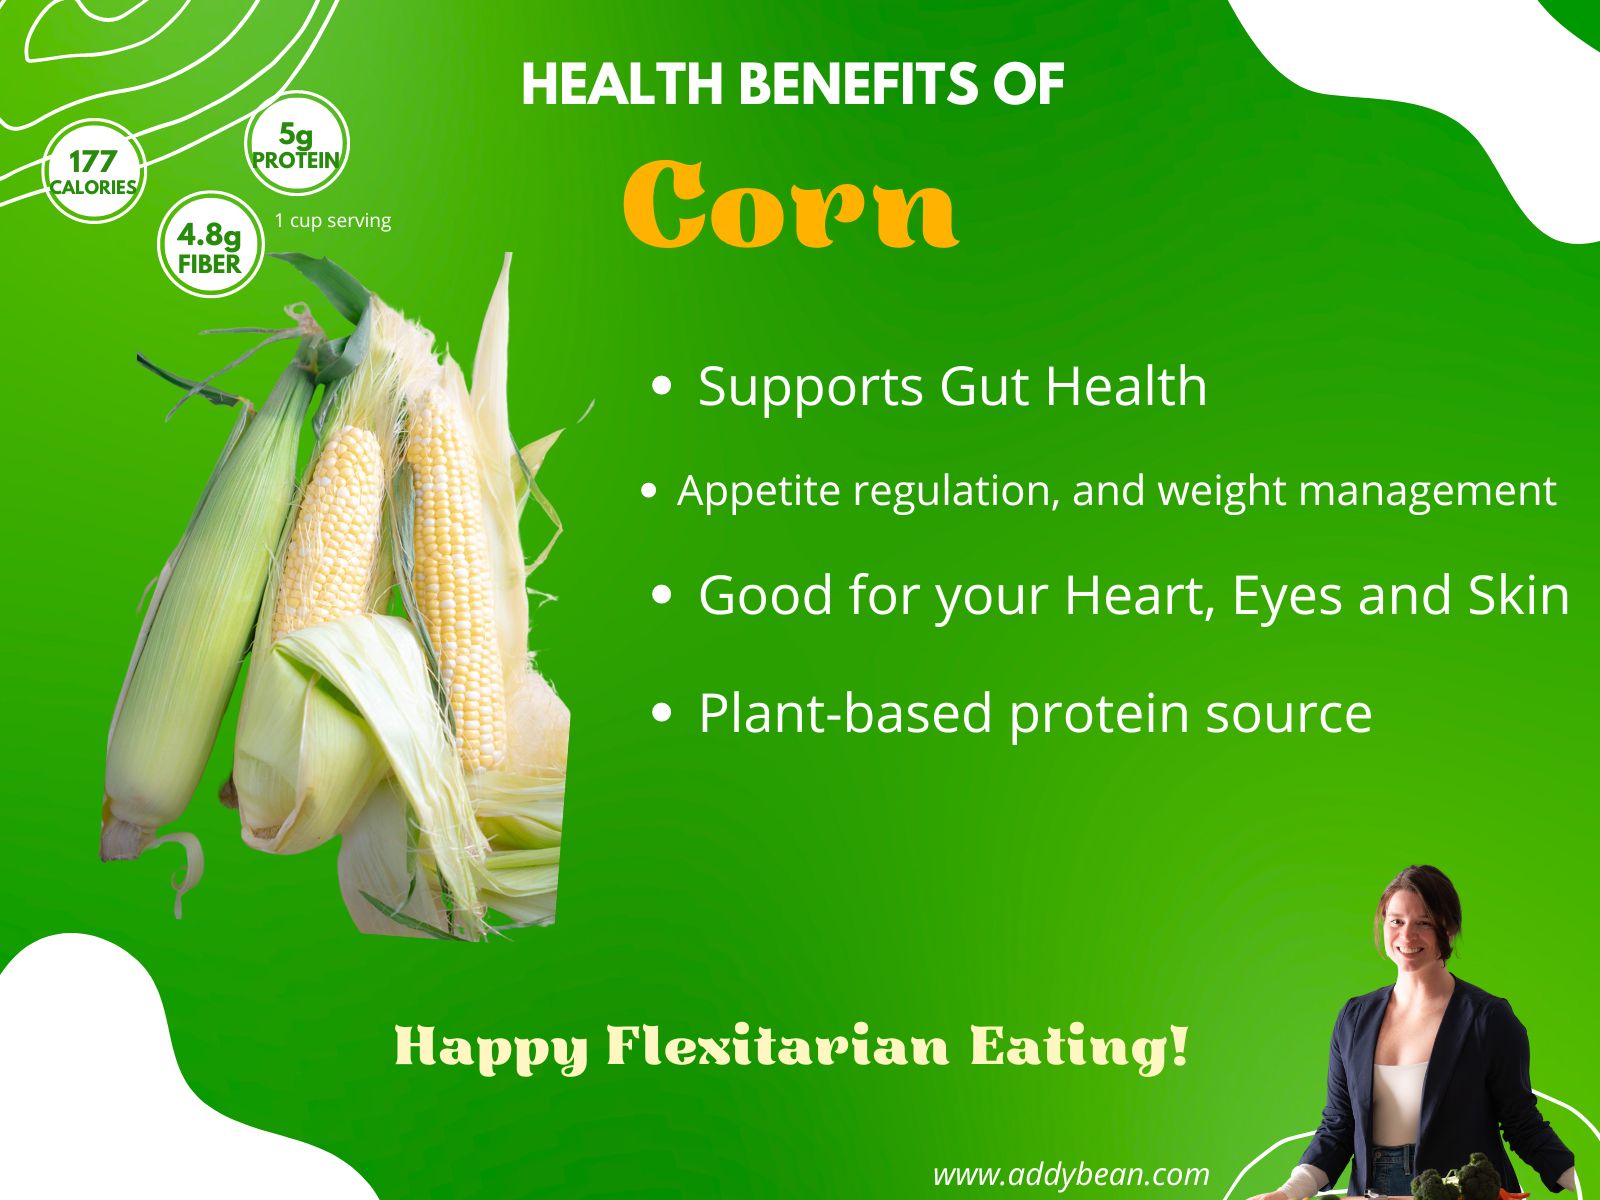 Infographic about the health benefits of corn with image of corn and the author